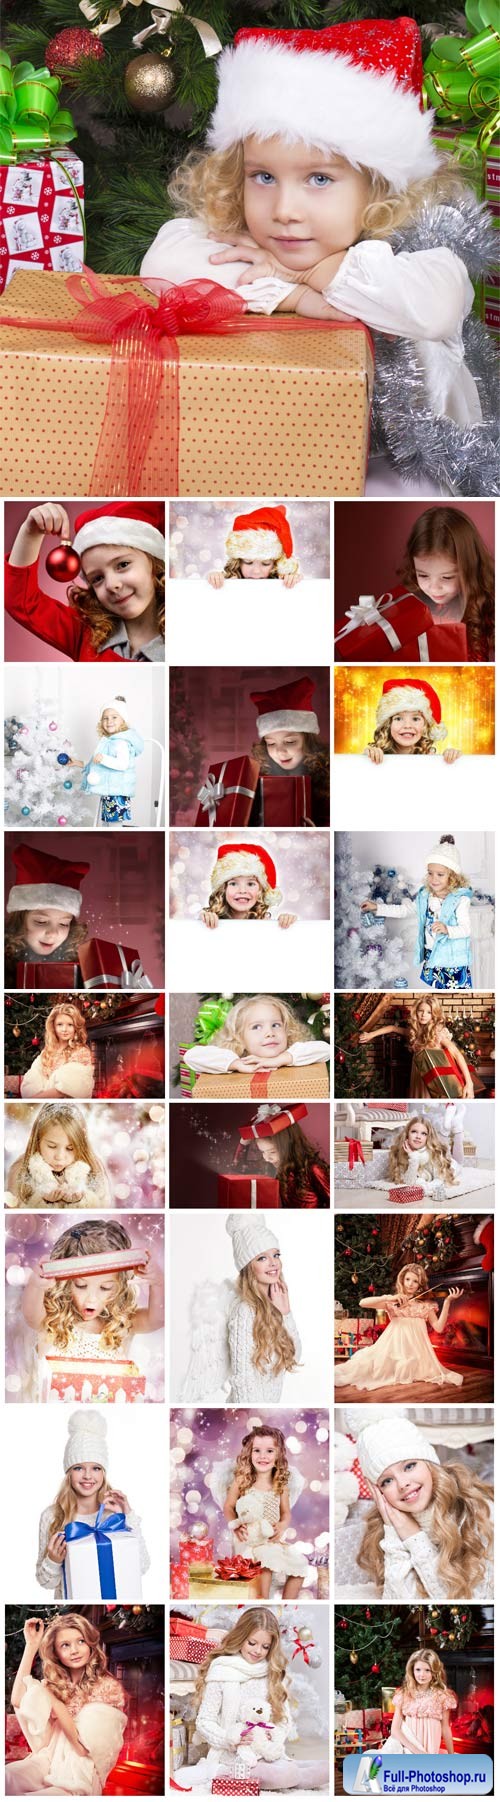 New Year and Christmas stock photos 9